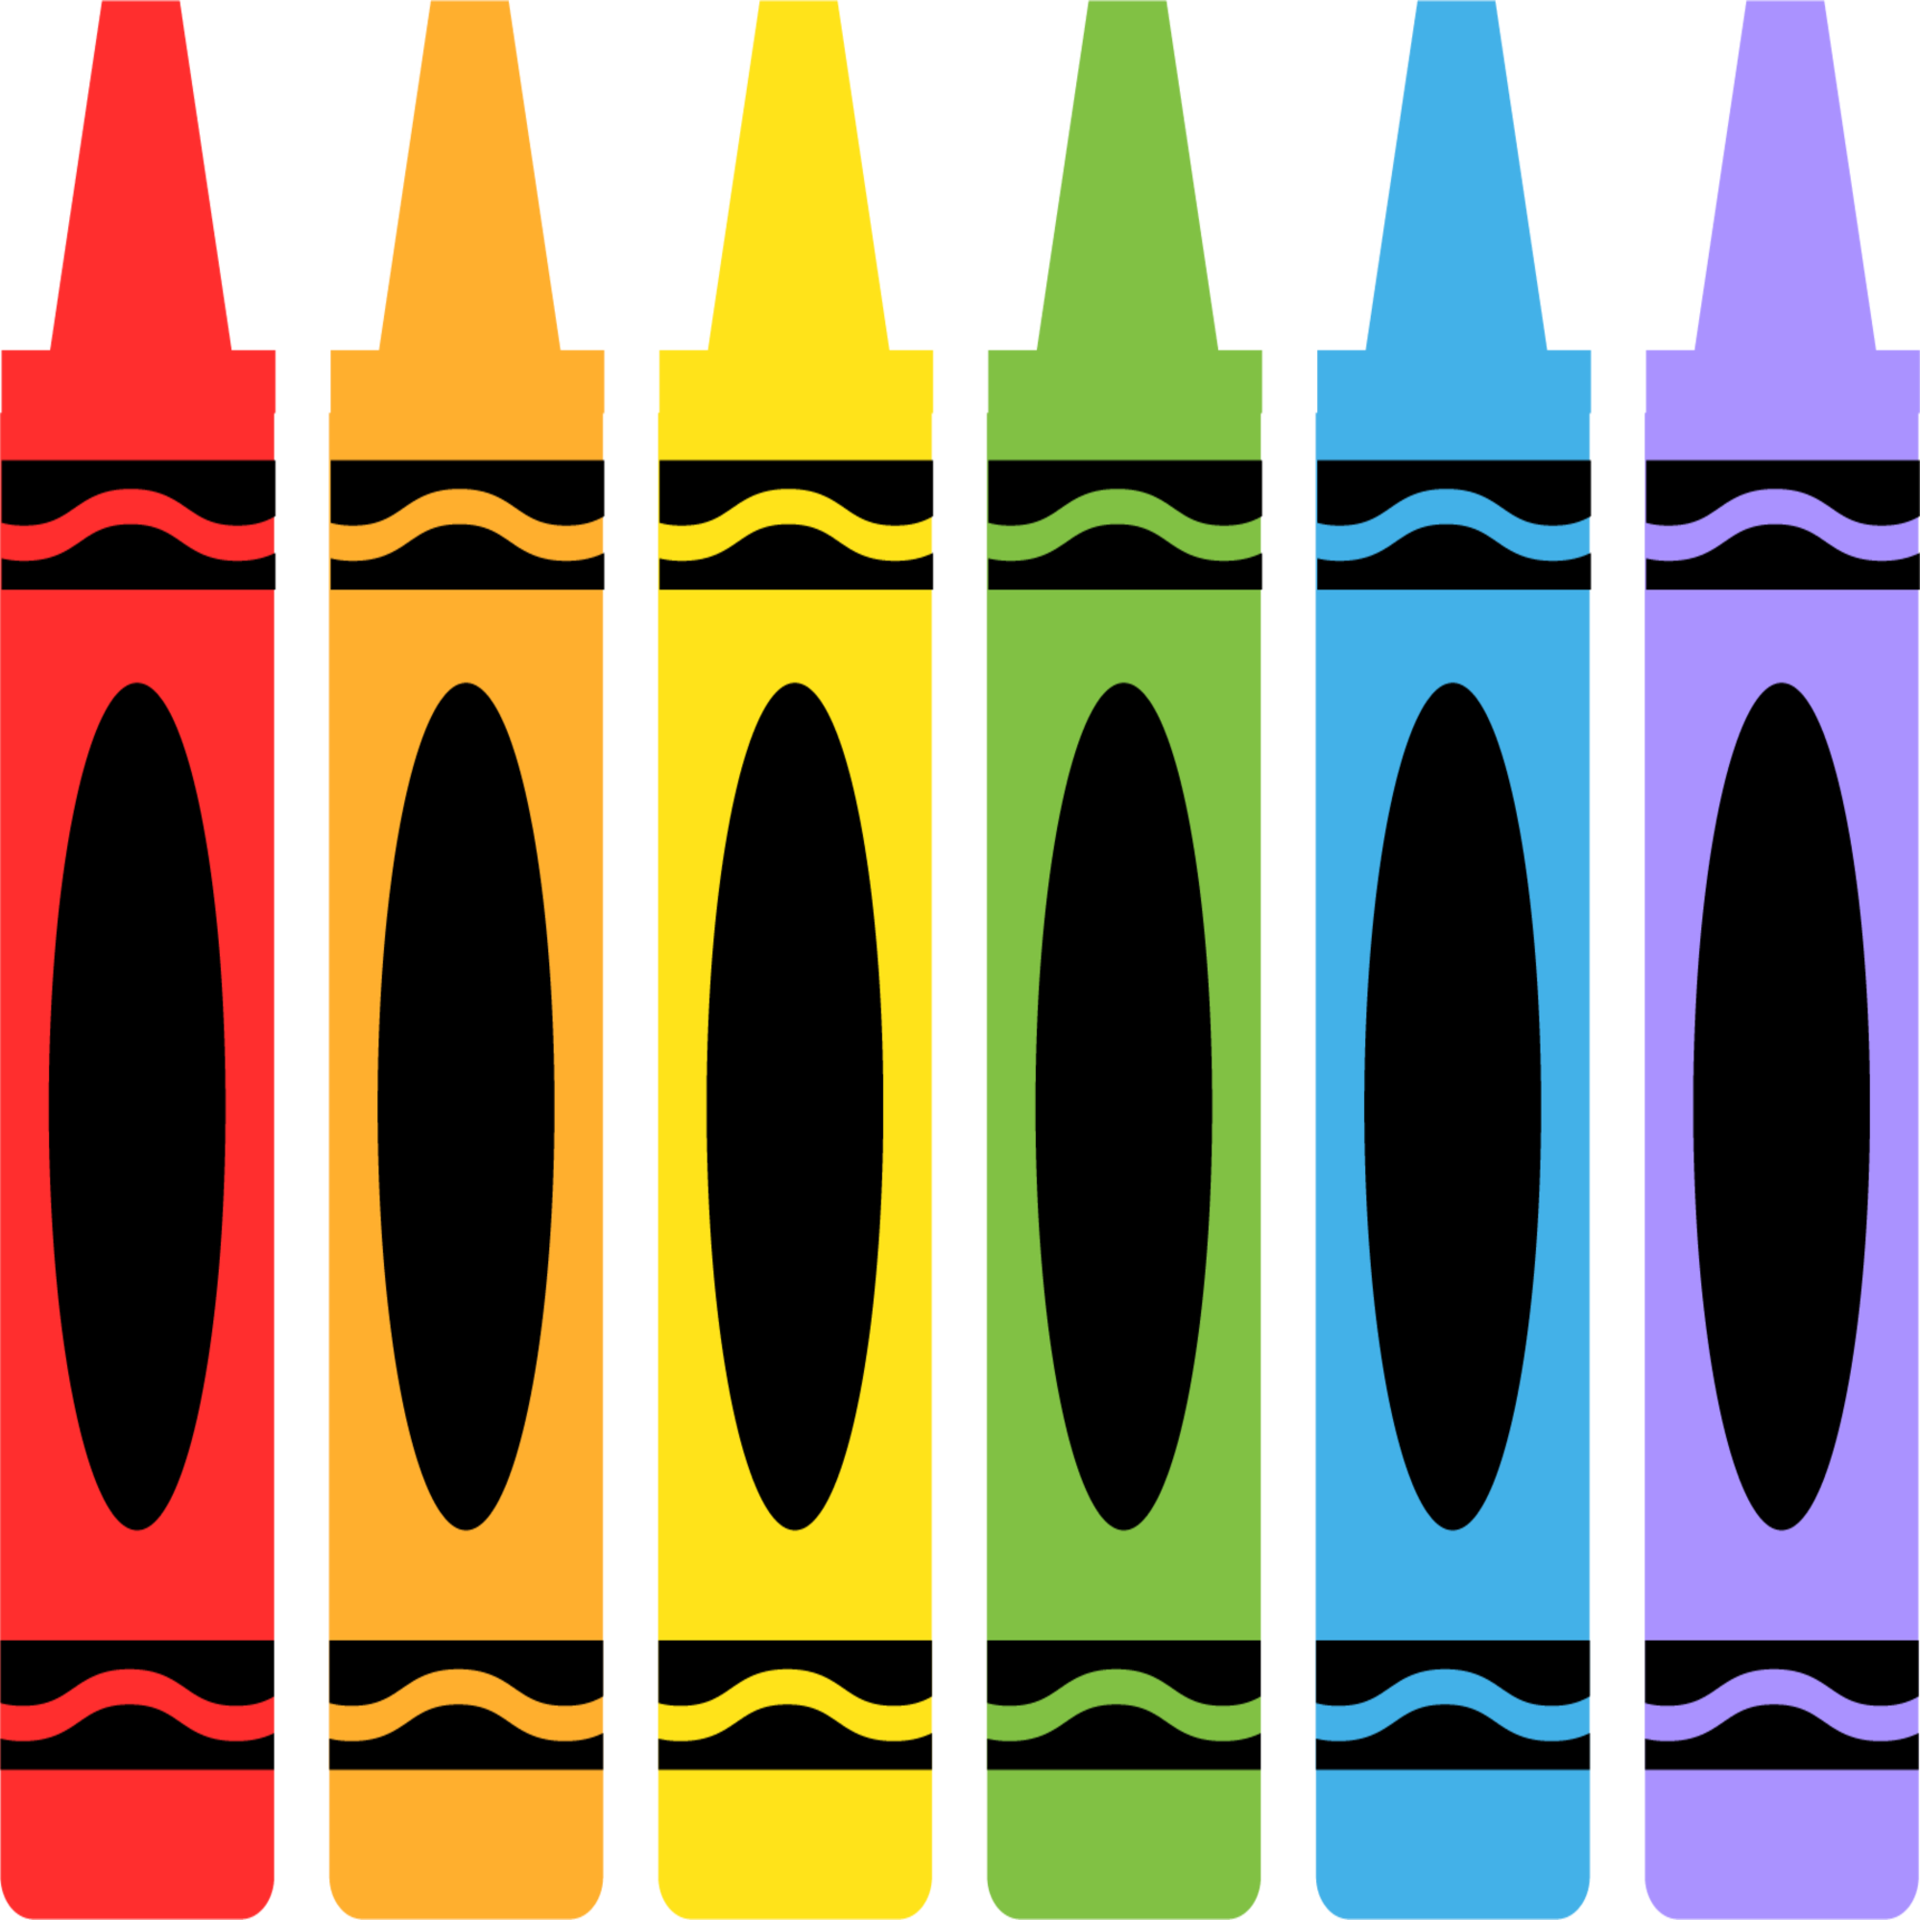 Crayon PNG Free Images with Transparent Background - (553 Free Downloads)